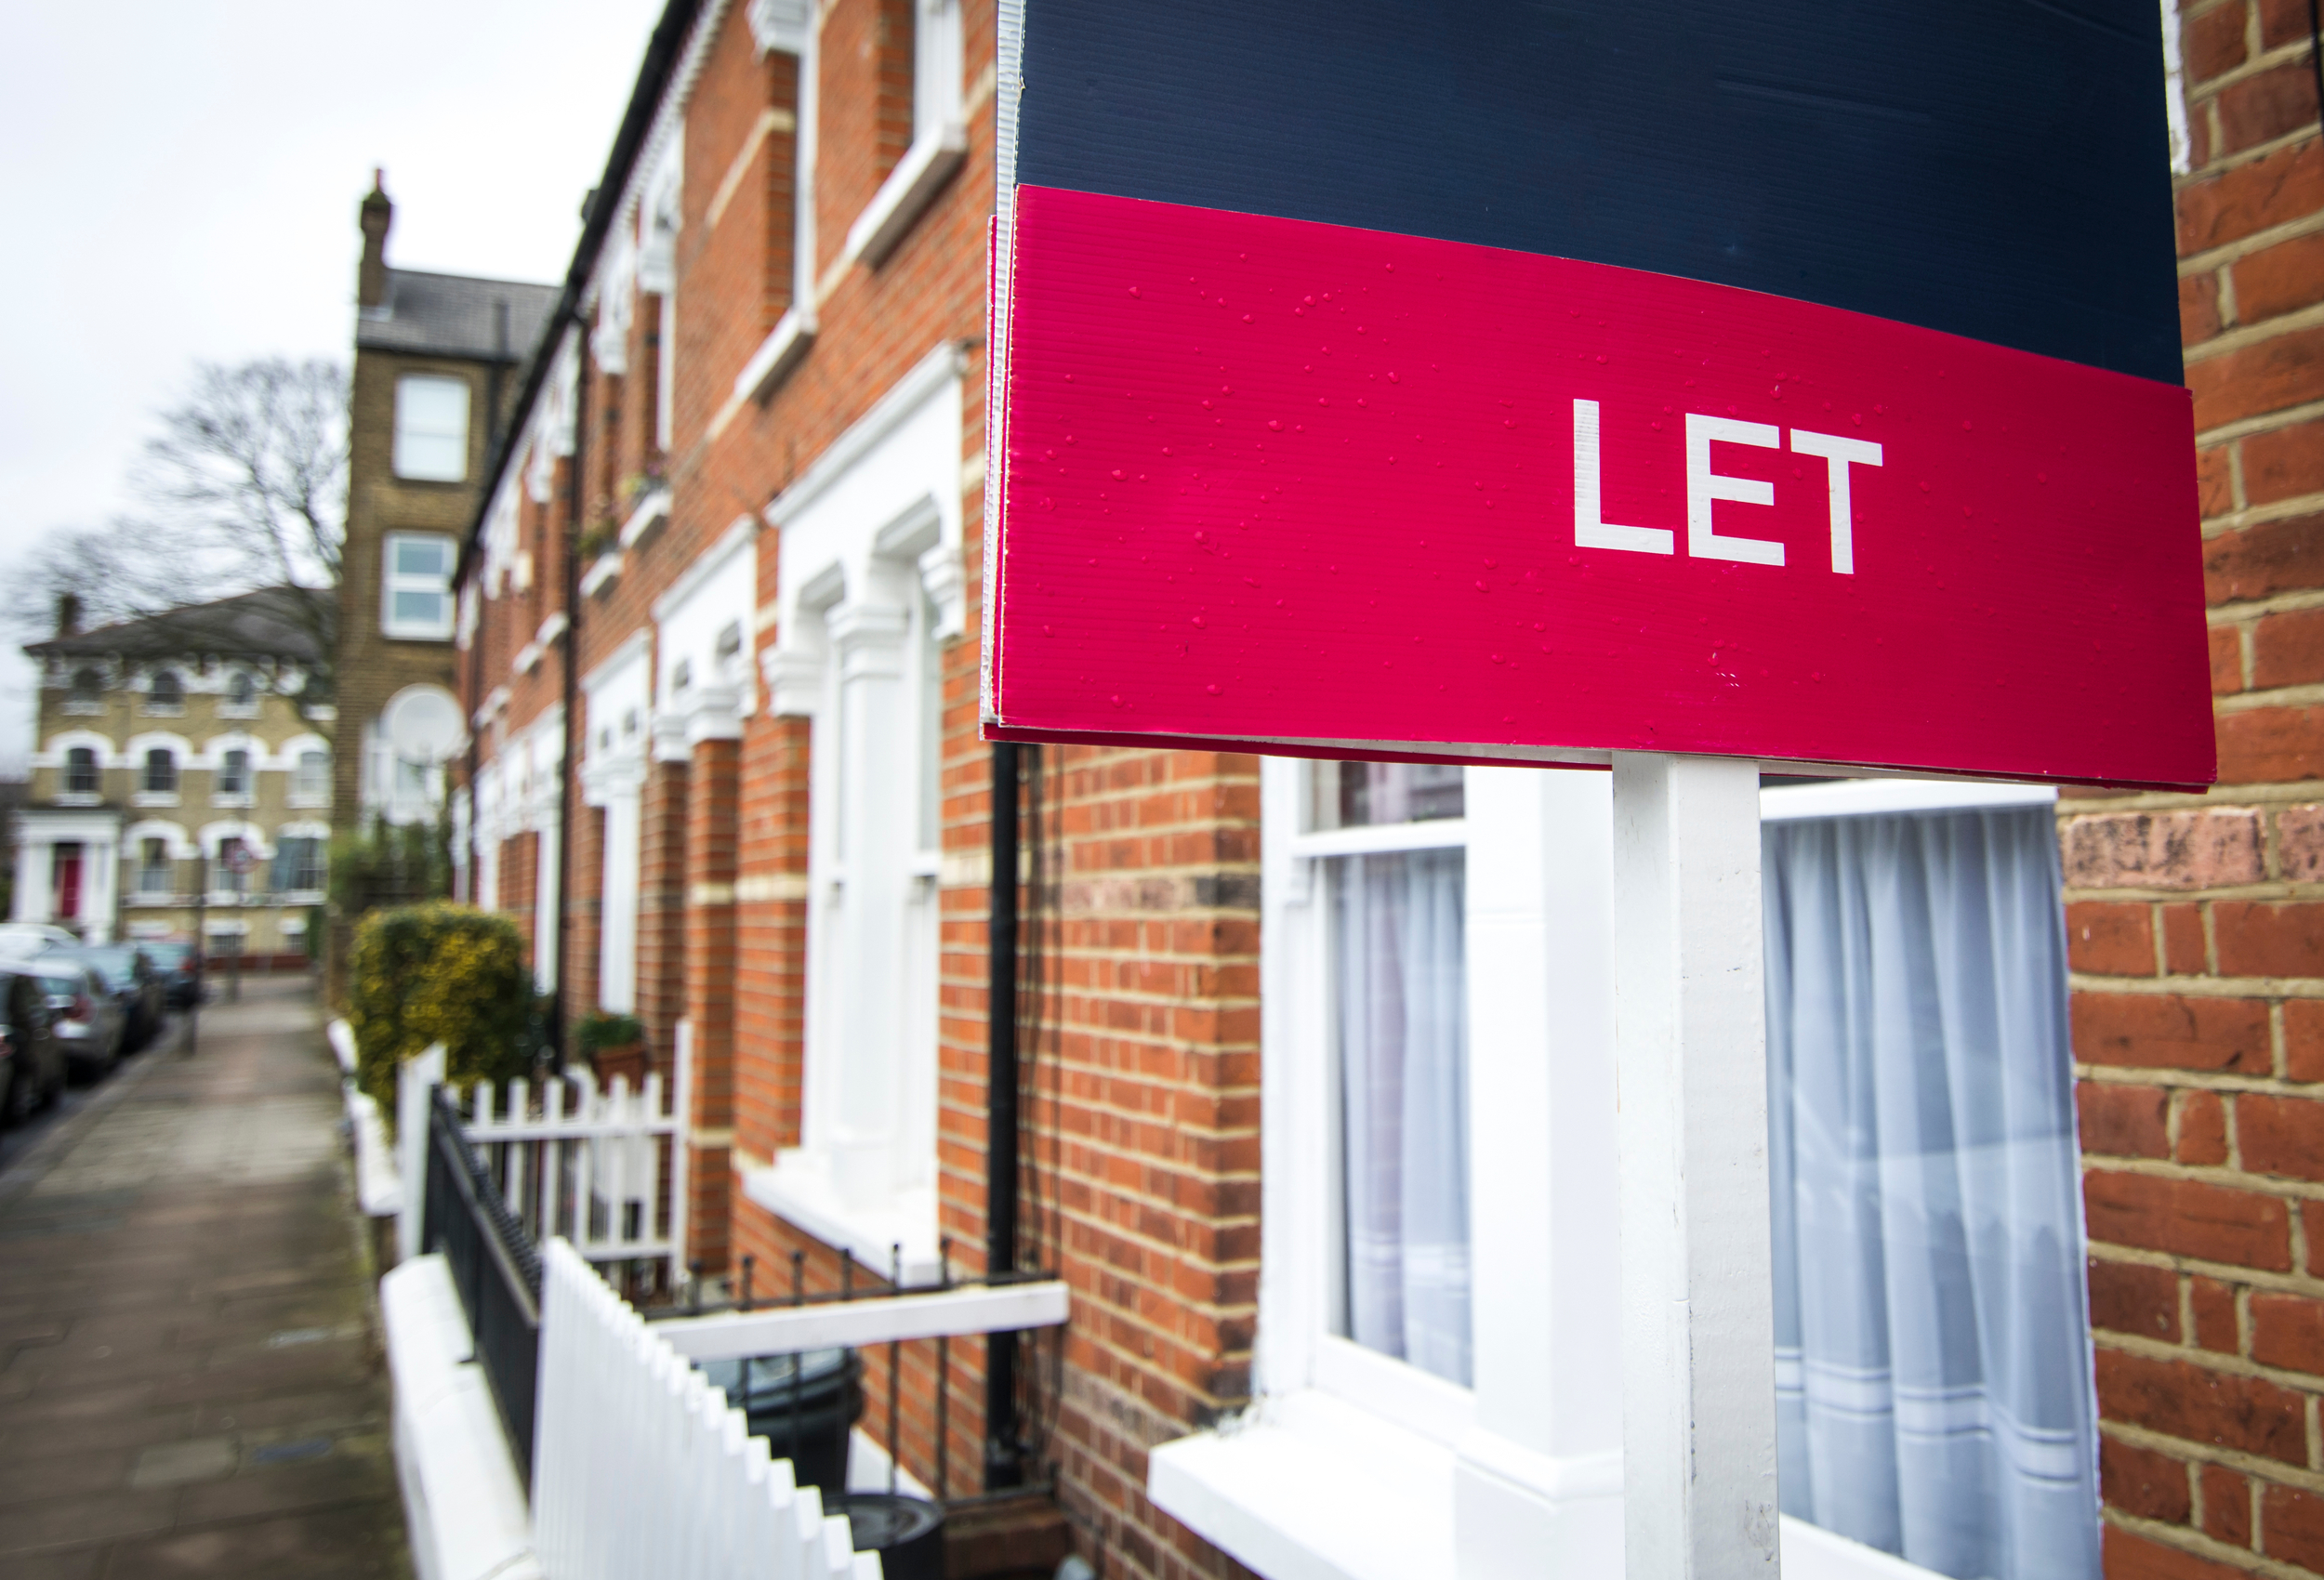 A “let” sign outside terraced houses.